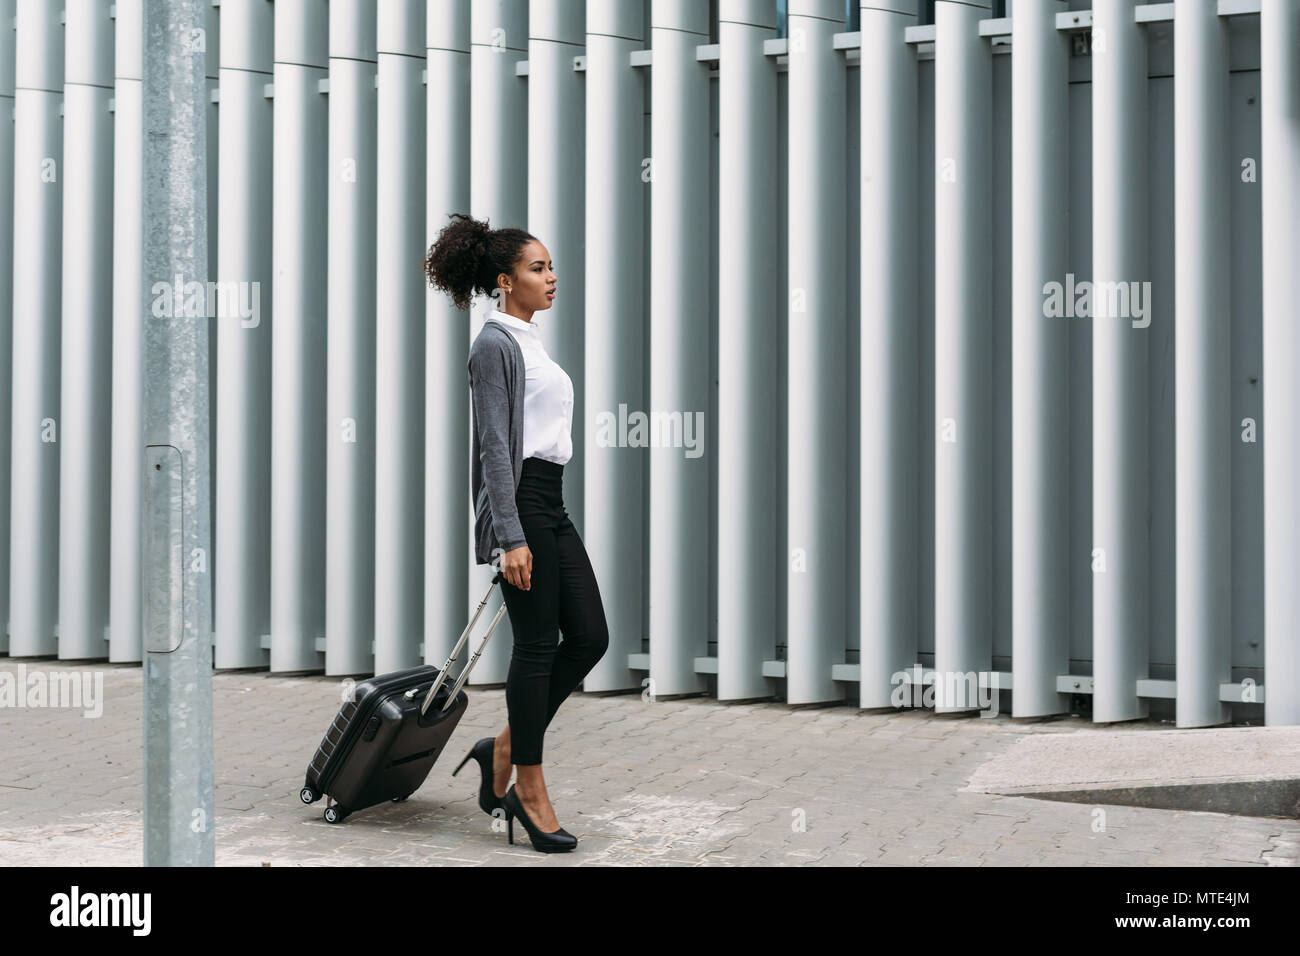 Businesswoman with rolling suitcase walking on street, side view Banque D'Images